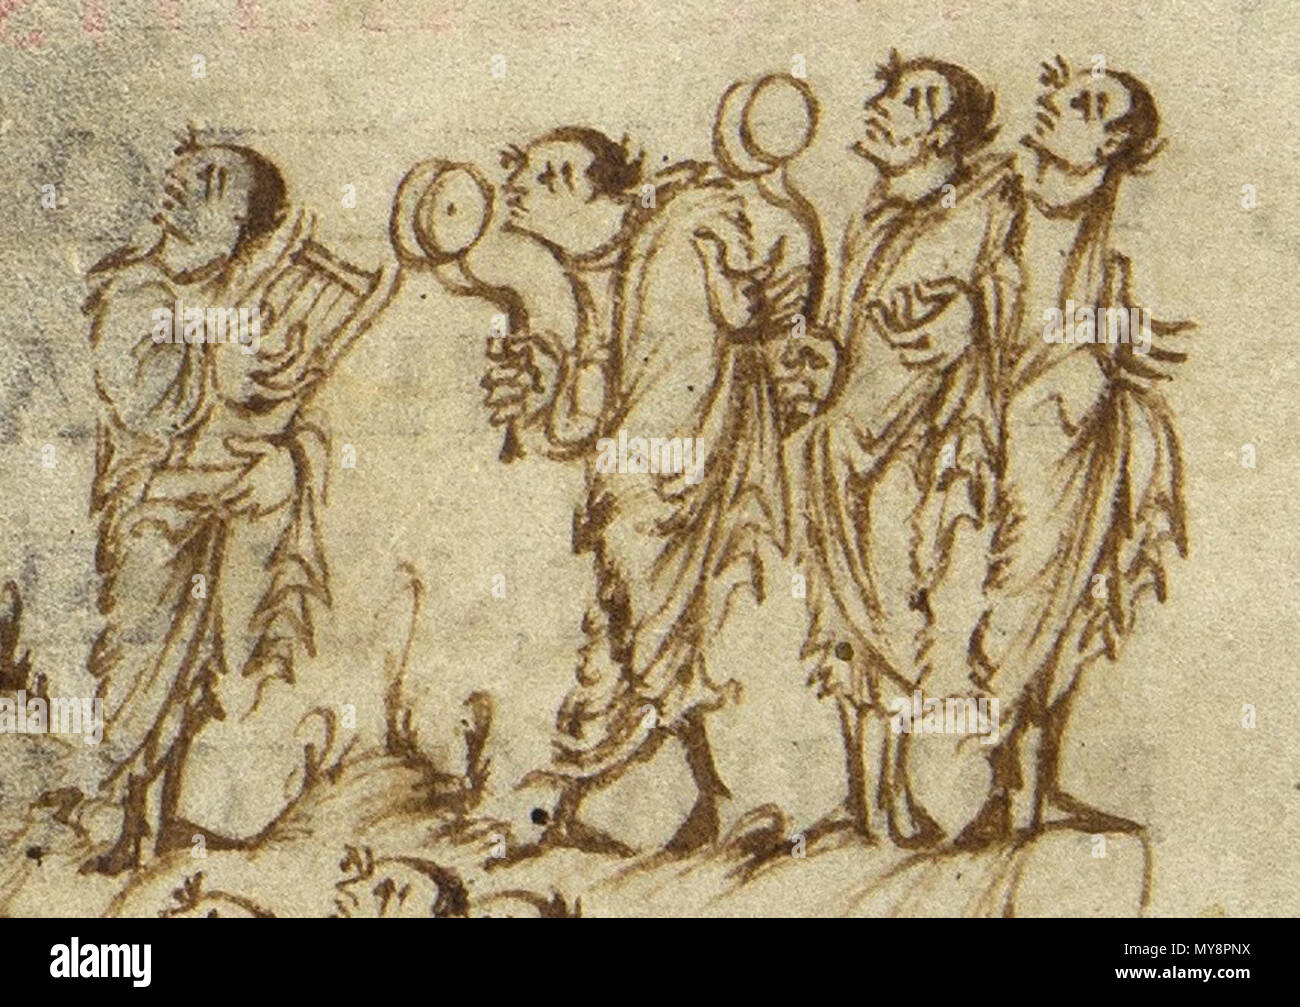 English: From the Utrecht Psalter, praising God with cymbals ('cymbalis' in  Latin). The instrument to the left is a psaltery or harp (likely a harp by  modern naming standards). circa 850